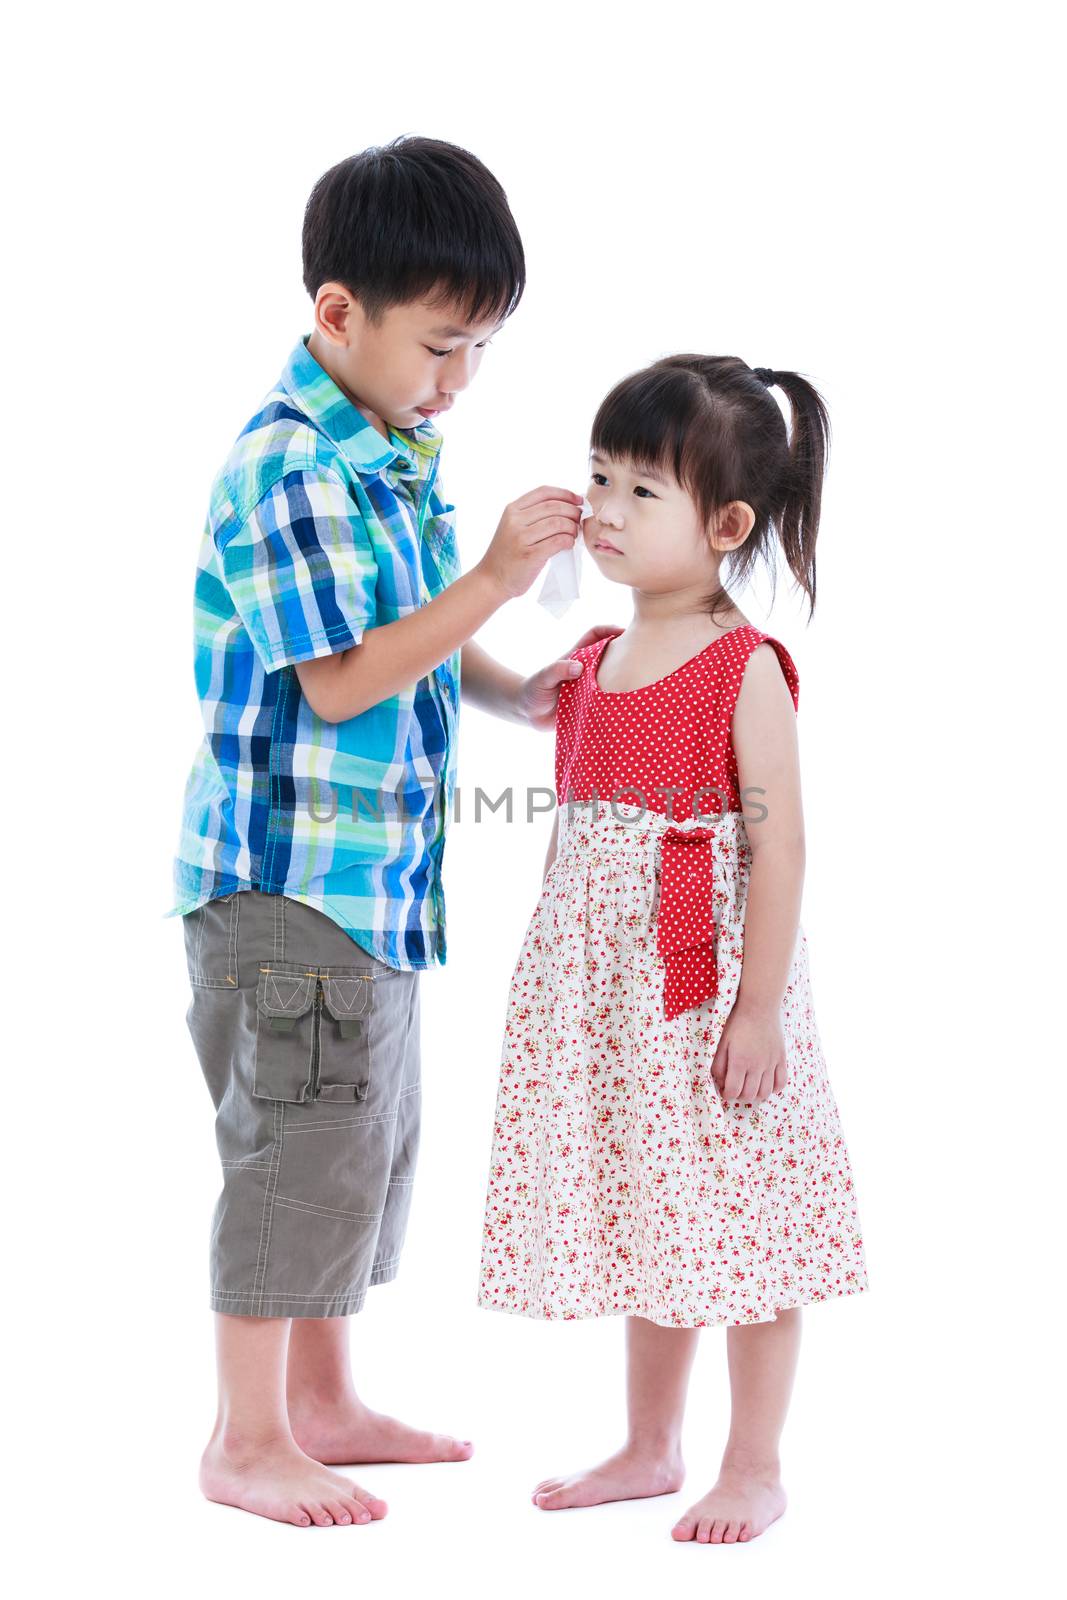 Full body. Elder brother is comforting his crying sister. Isolated on white. by kdshutterman